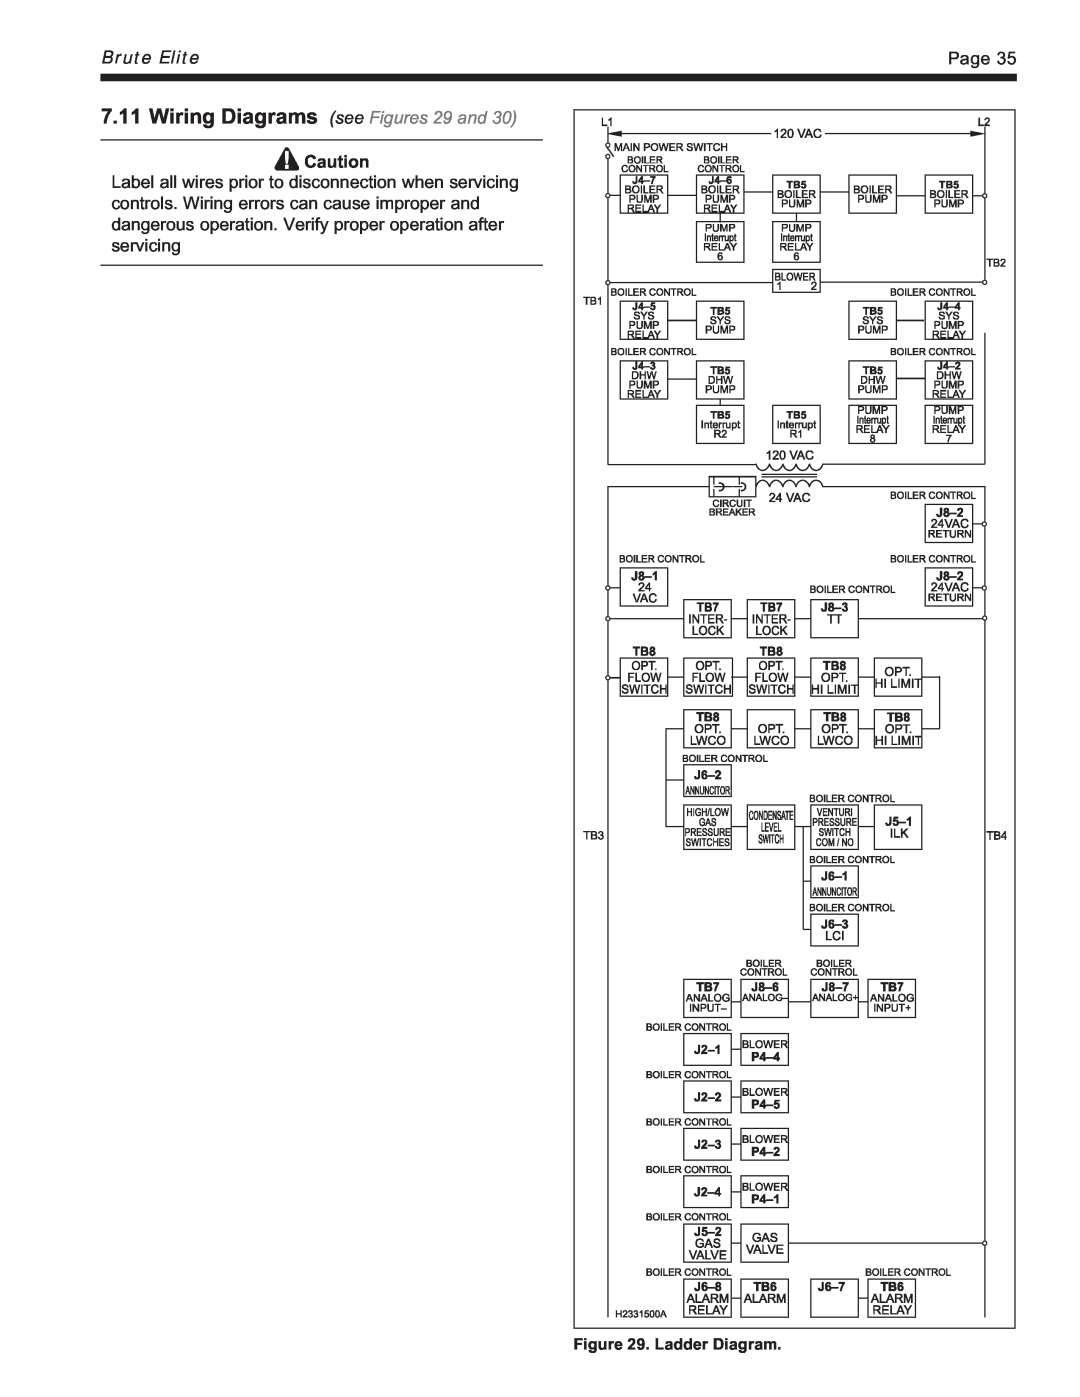 Bradford-White Corp Modulating Boiler, BNTH, BNTV Wiring Diagrams see Figures 29 and, Brute Elite, Page, Ladder Diagram 